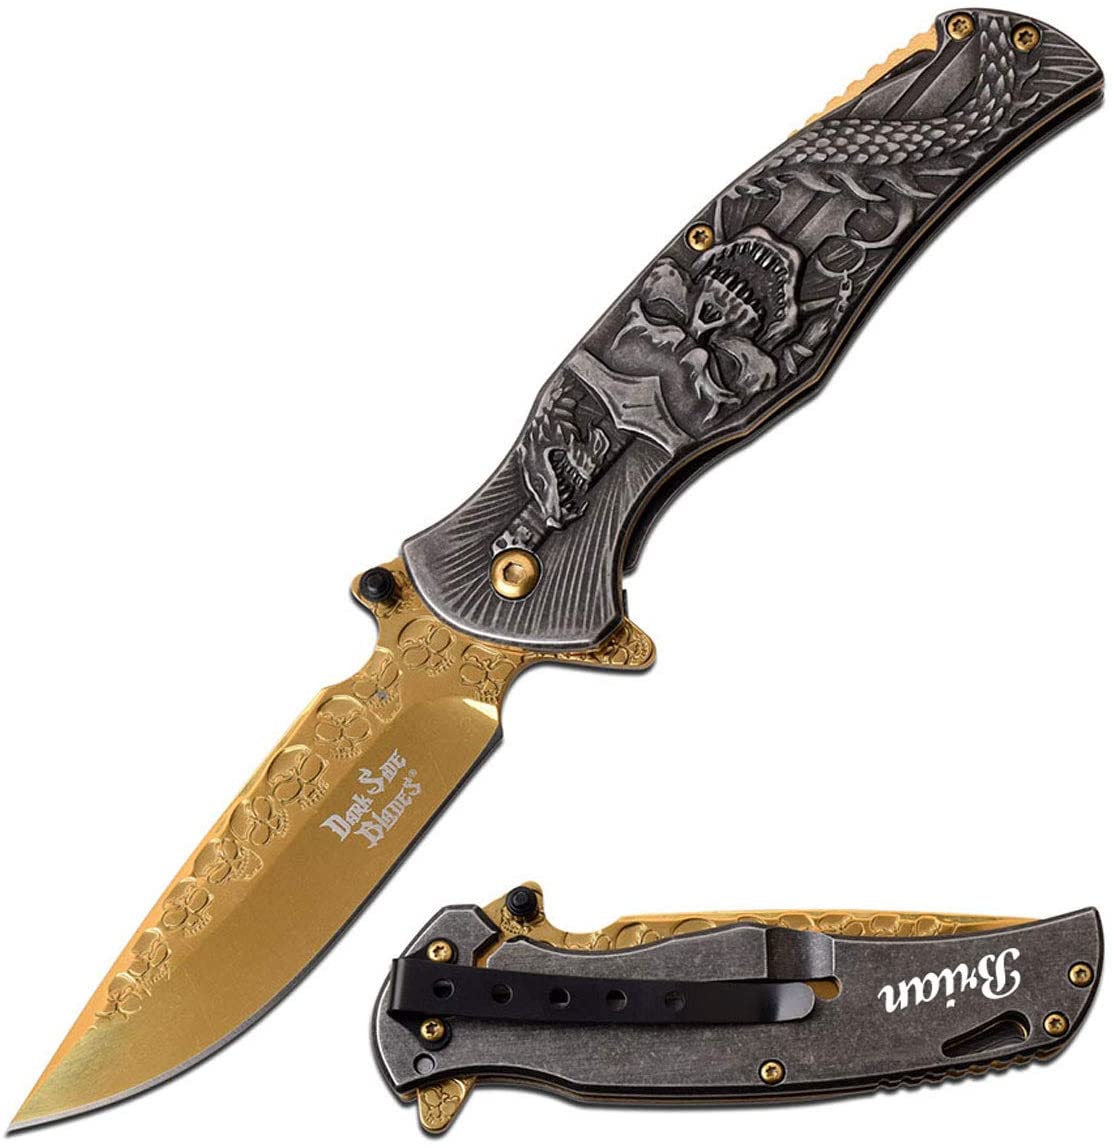 GIFTS INFINITY 8" Skull Folding Knife Tactical Pocket Knives Outdoor Survival Camping EDC Knife with Gold Mirror Blade